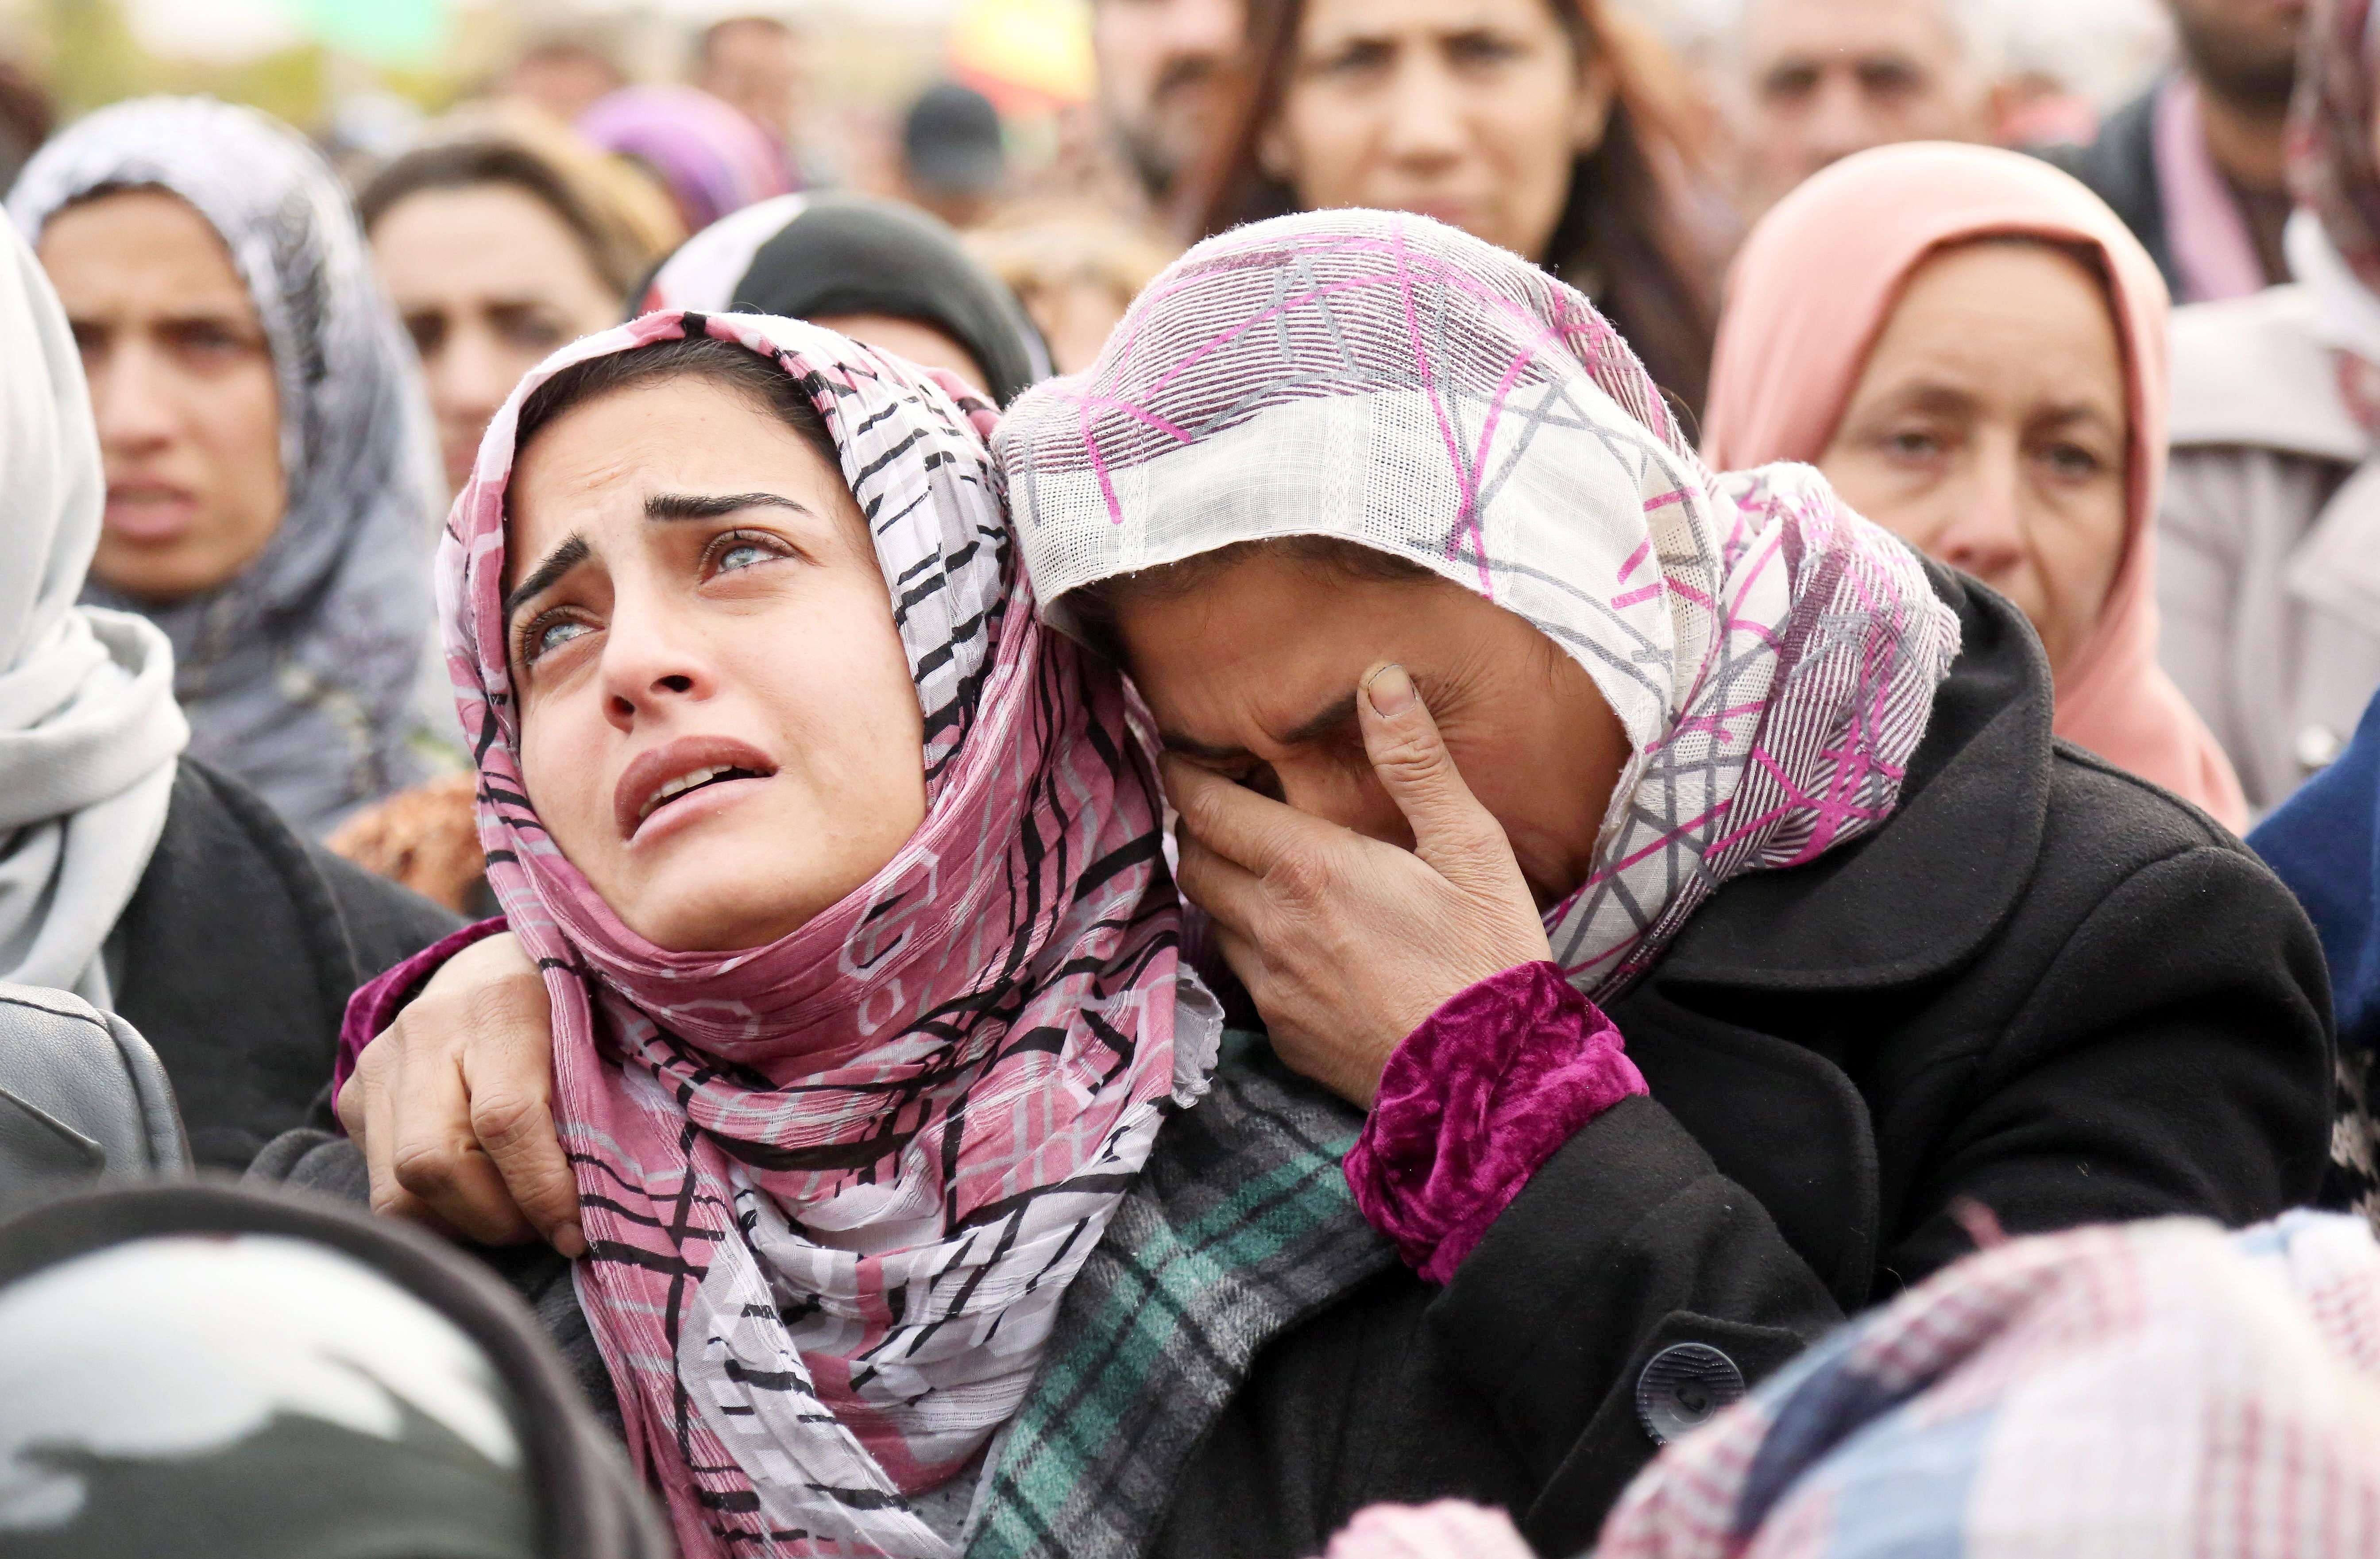 TOPSHOT - The sister (L) of Mohammed Ismael, who died in one of three suicide car bombings claimed by the Islamic State (IS) group in the nearby town of Tal Tamr earlier this week, mourns during his funeral in Qamishli, a Kurdish-majority city in Syria's northeastern Hasakeh province, on December 13, 2015. Tal Tamr, in the Khabur region, is controlled by Kurdish forces and has been targeted in the past by IS jihadists, who in February overran much of Khabur and kidnapped at least 220 Assyrian Christians. AFP PHOTO / DELIL SOULEIMAN  / AFP / DELIL SOULEIMAN